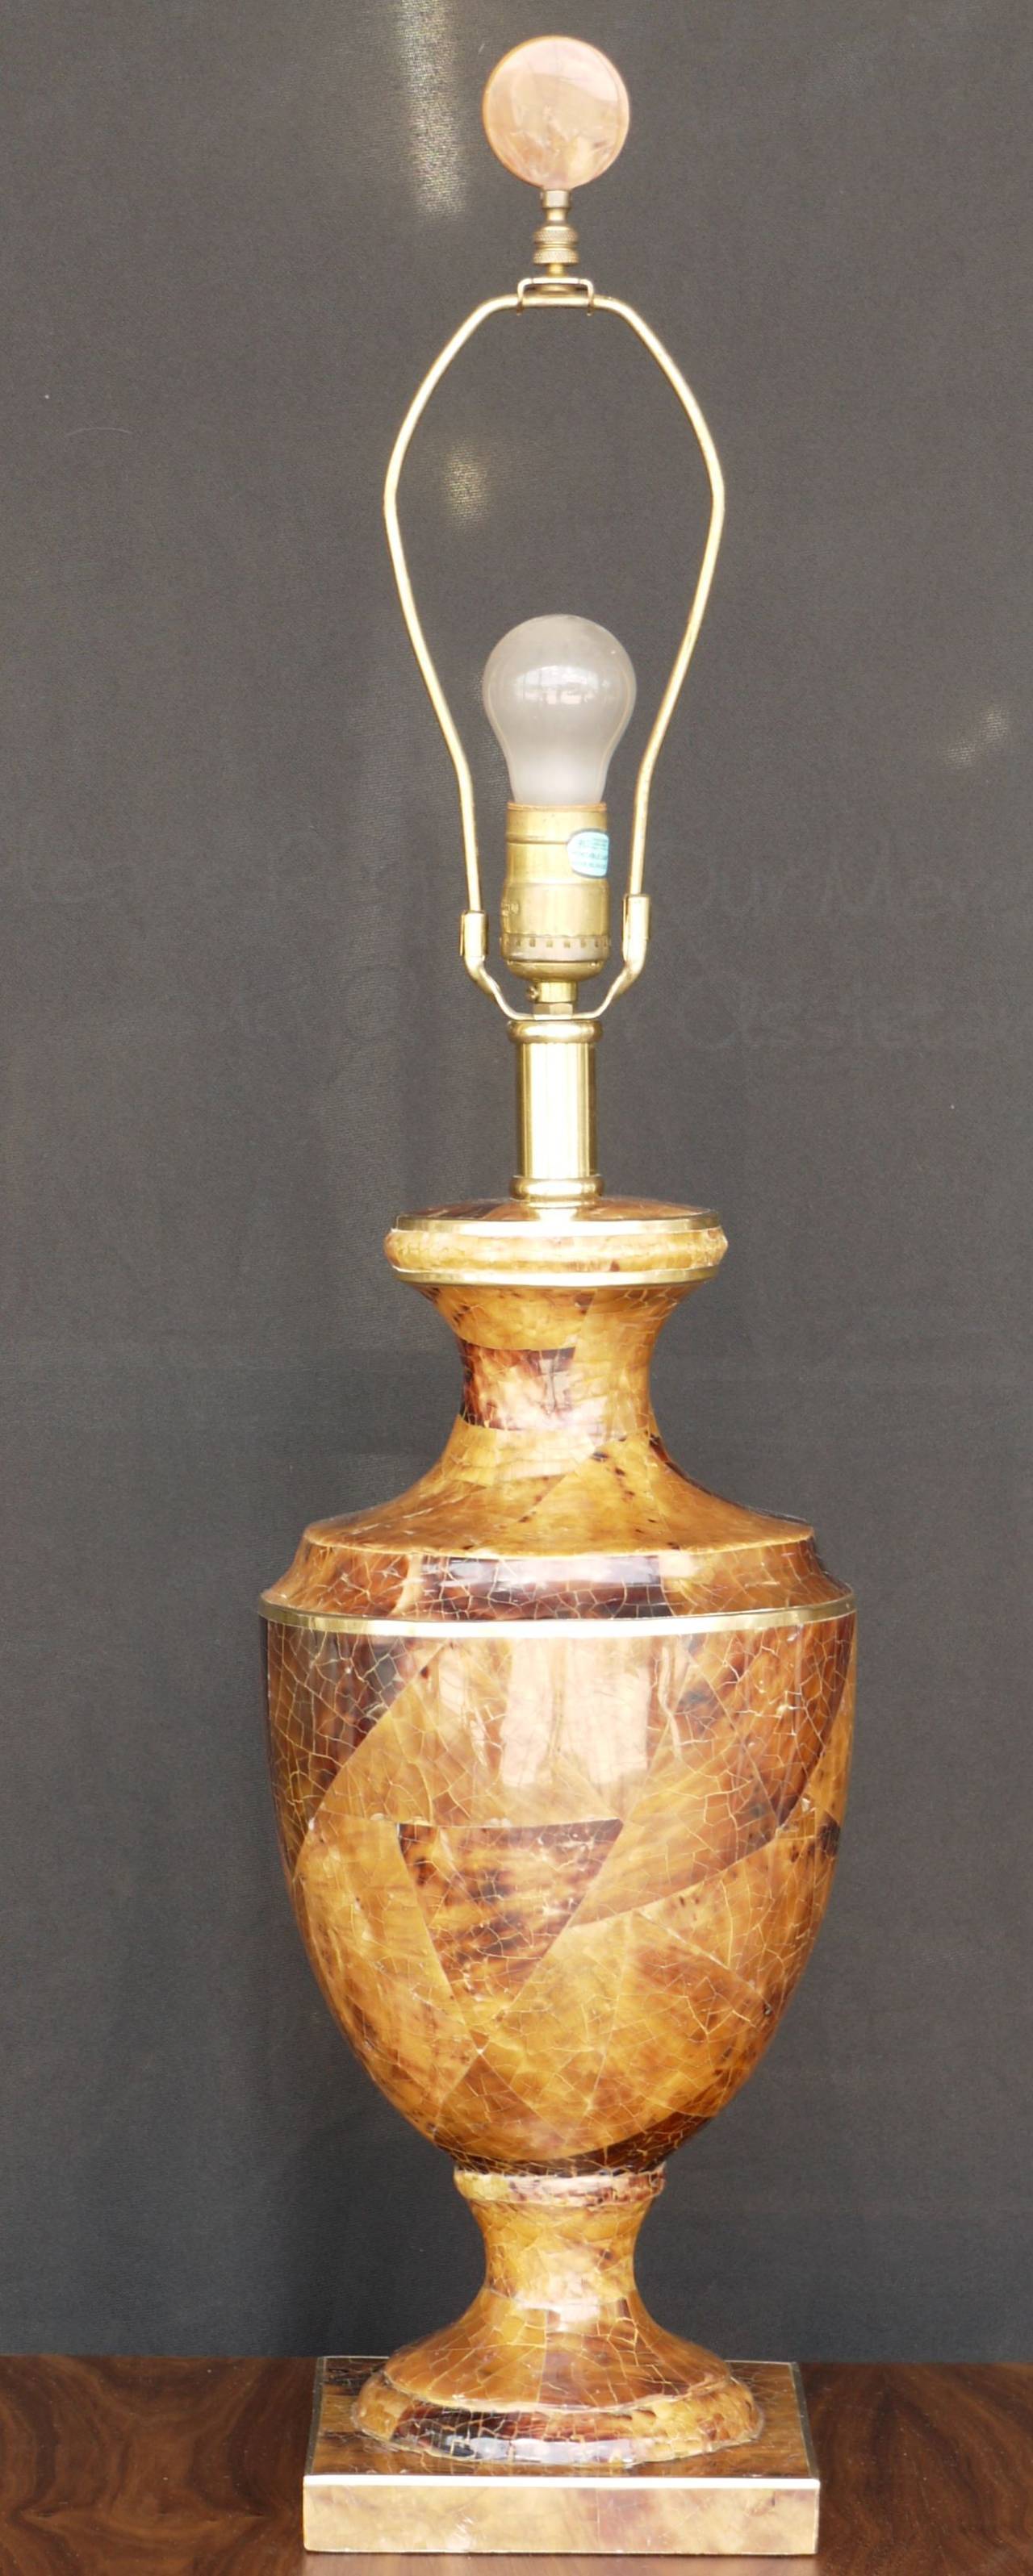 A classical penshell urn shaped table lamp with brass detail. Penshell is a beautiful alternative the tortoise shell and is constructed in a similar manner as eggshell lacquer. The brass banding is pinned in place, and the whole structure is over a